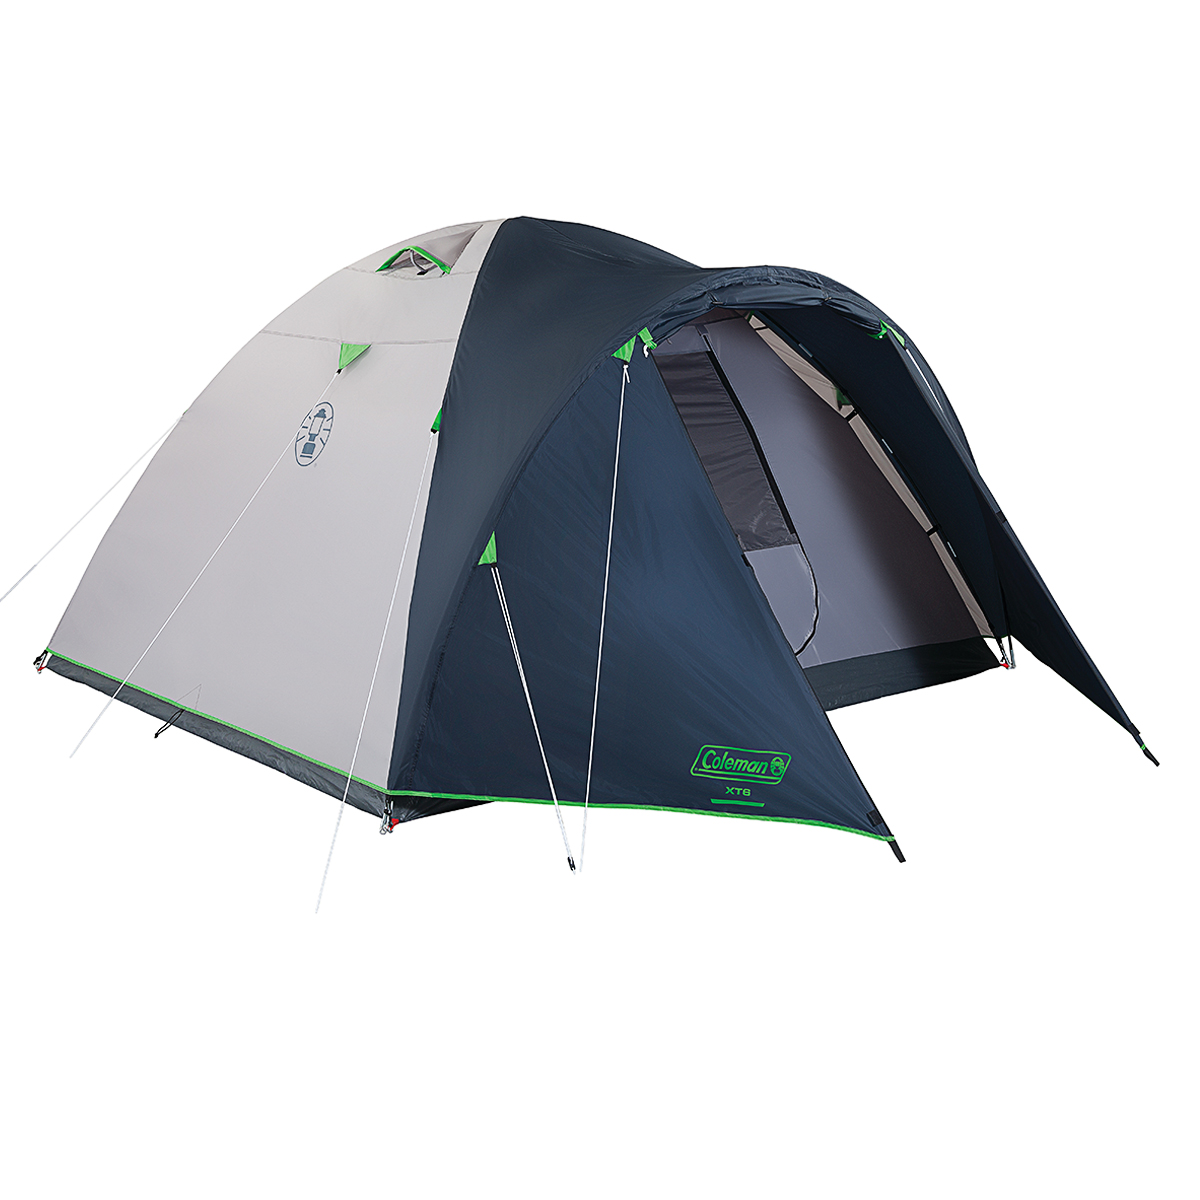 Carpa Coleman Xt 6 personas,  image number null